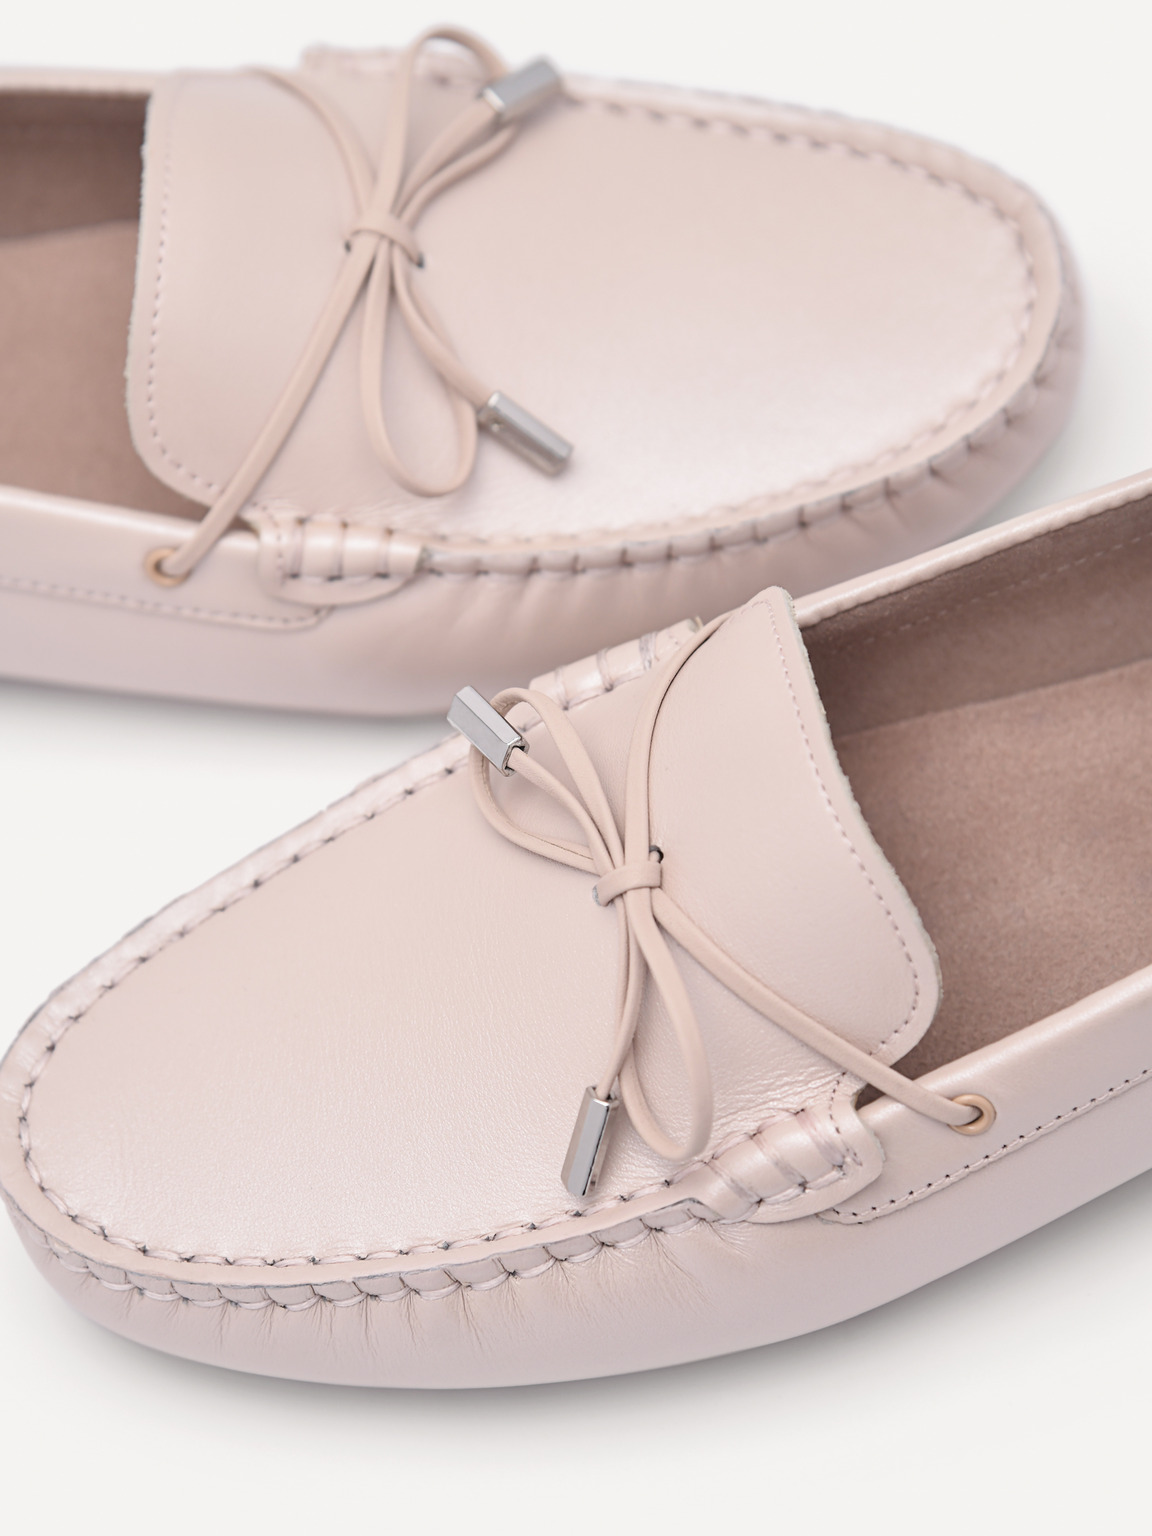 Pearlized Calf Leather Bow Moccasins, Nude